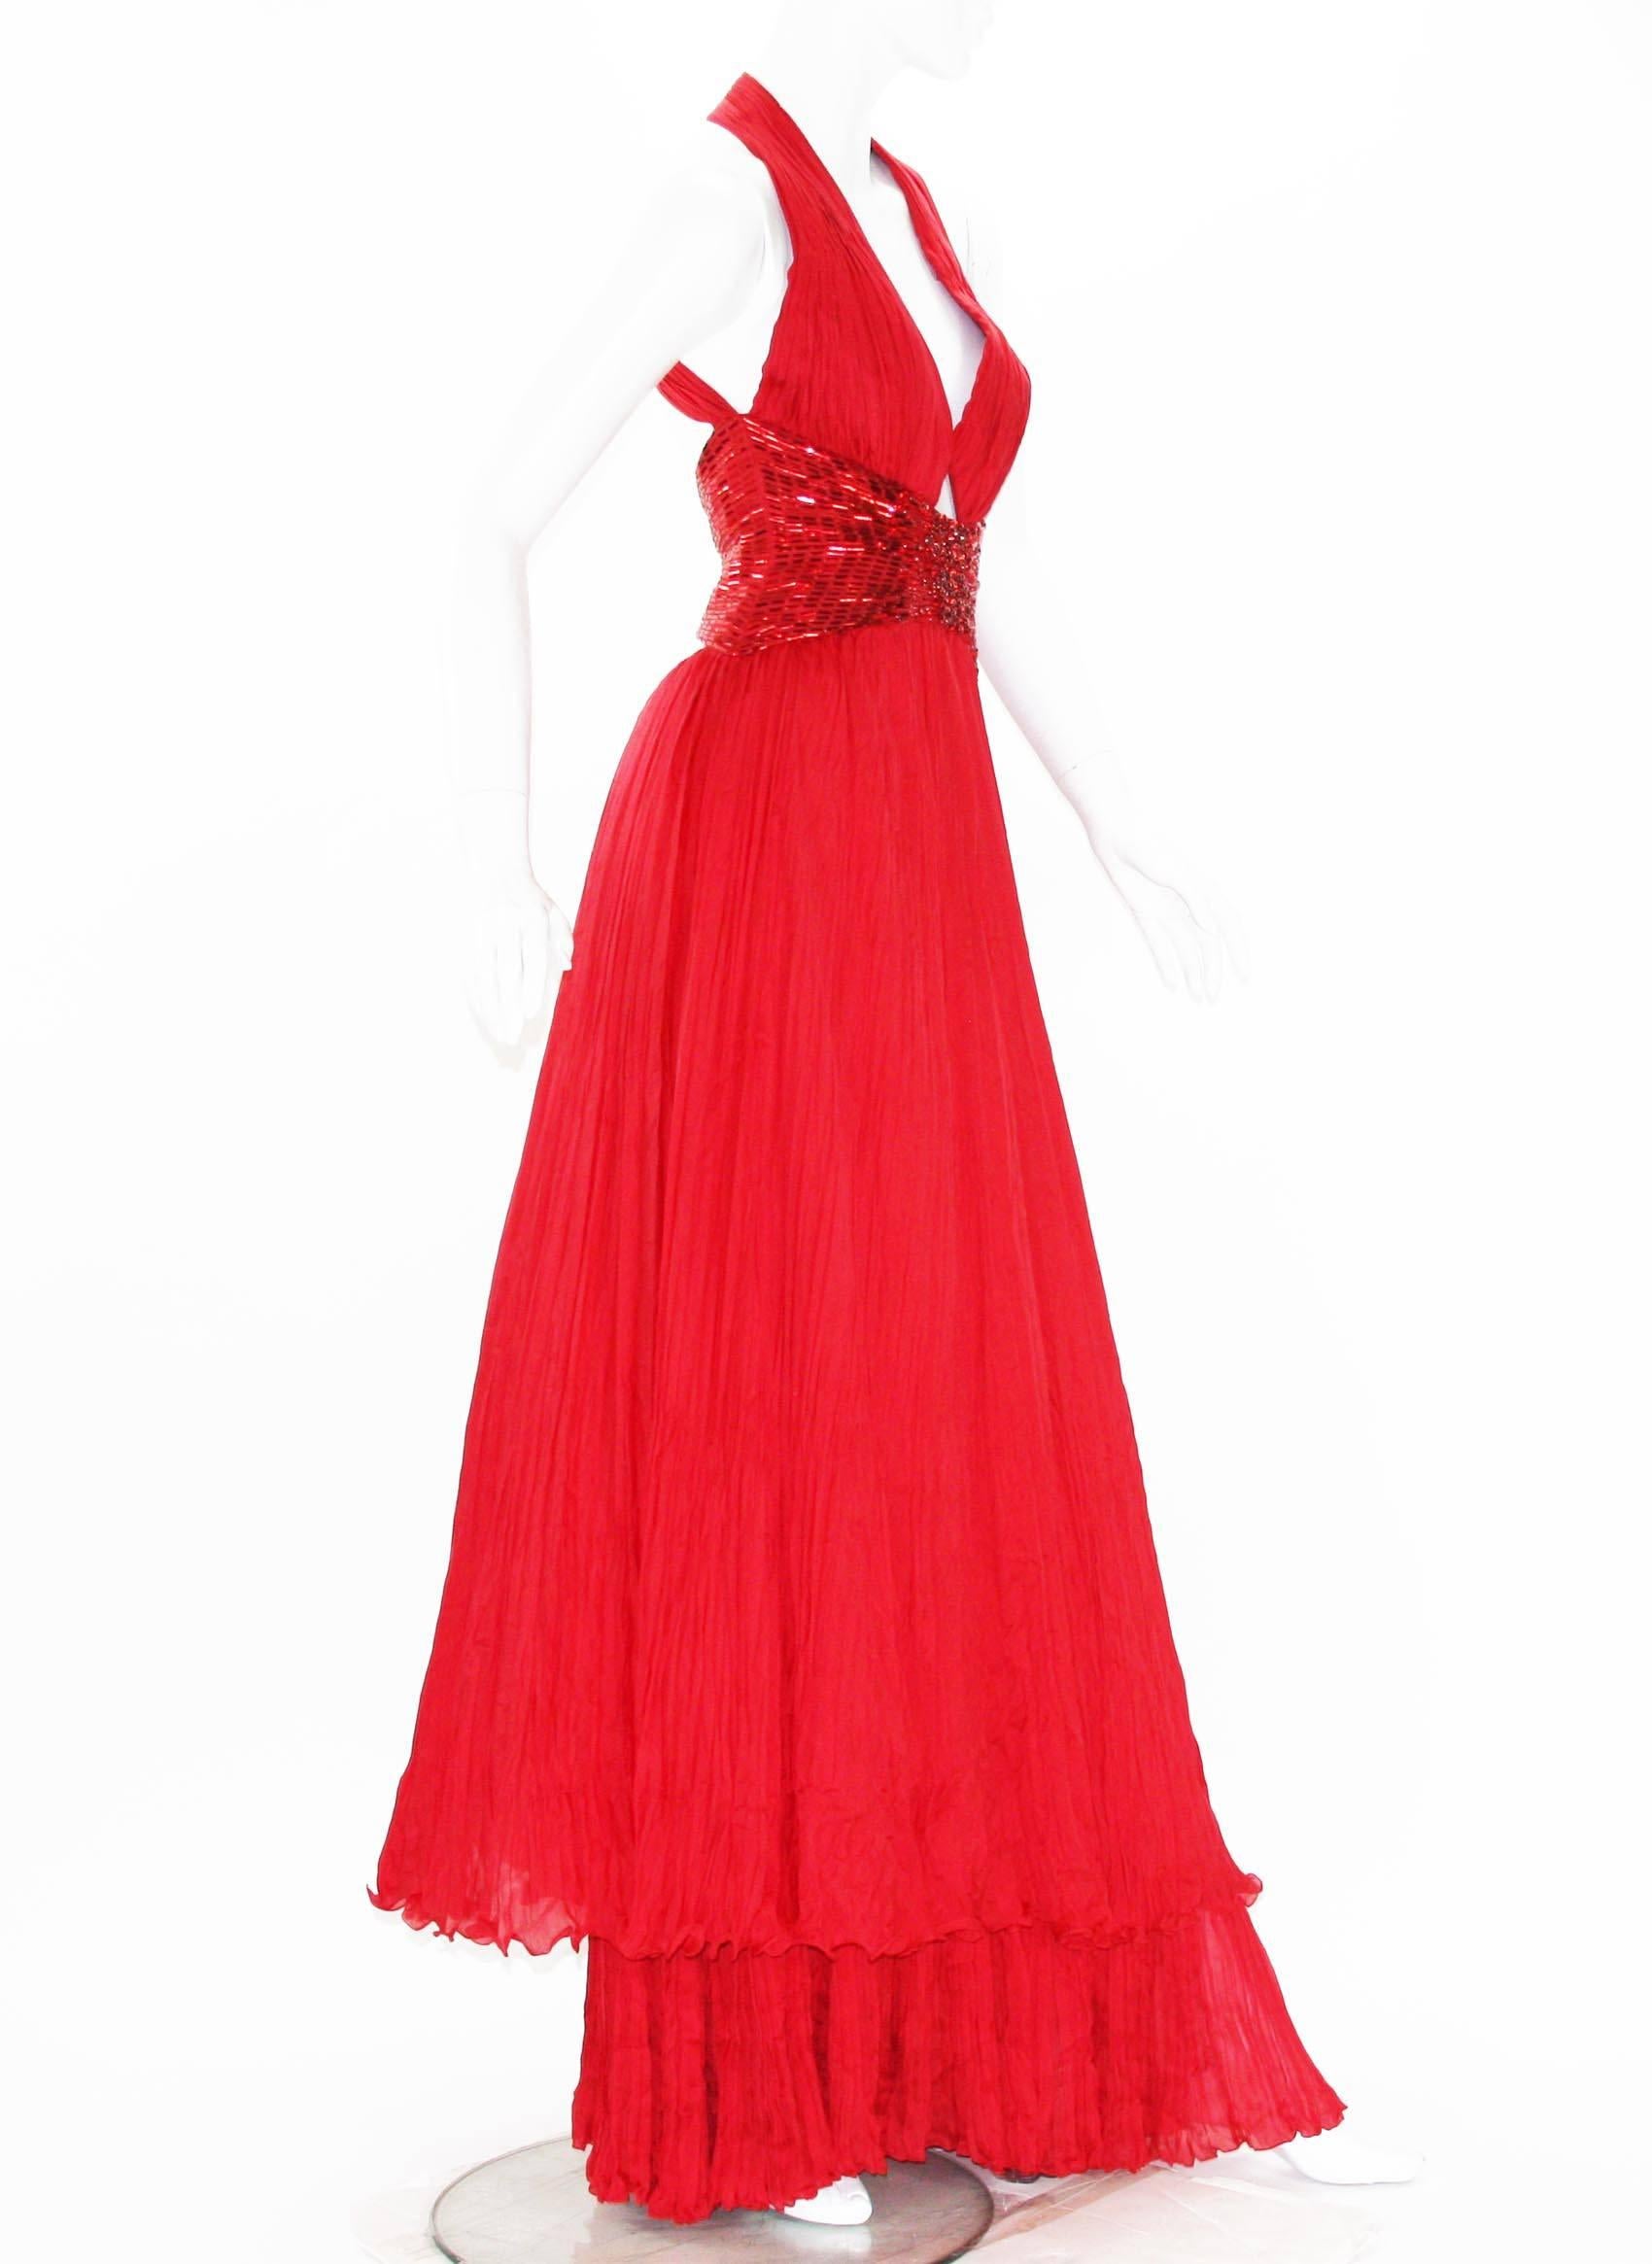 New Roberto Cavalli Red Silk Beaded Long Dress Gown
Designer size 40
Unforgettable Marilyn Monroe Style.
100% Plisse-Silk, Double Layered, Fully Lined, Wide Build in Belt with Crystals and Sequin Embellishment.
Measurements: Length - 63 inches,